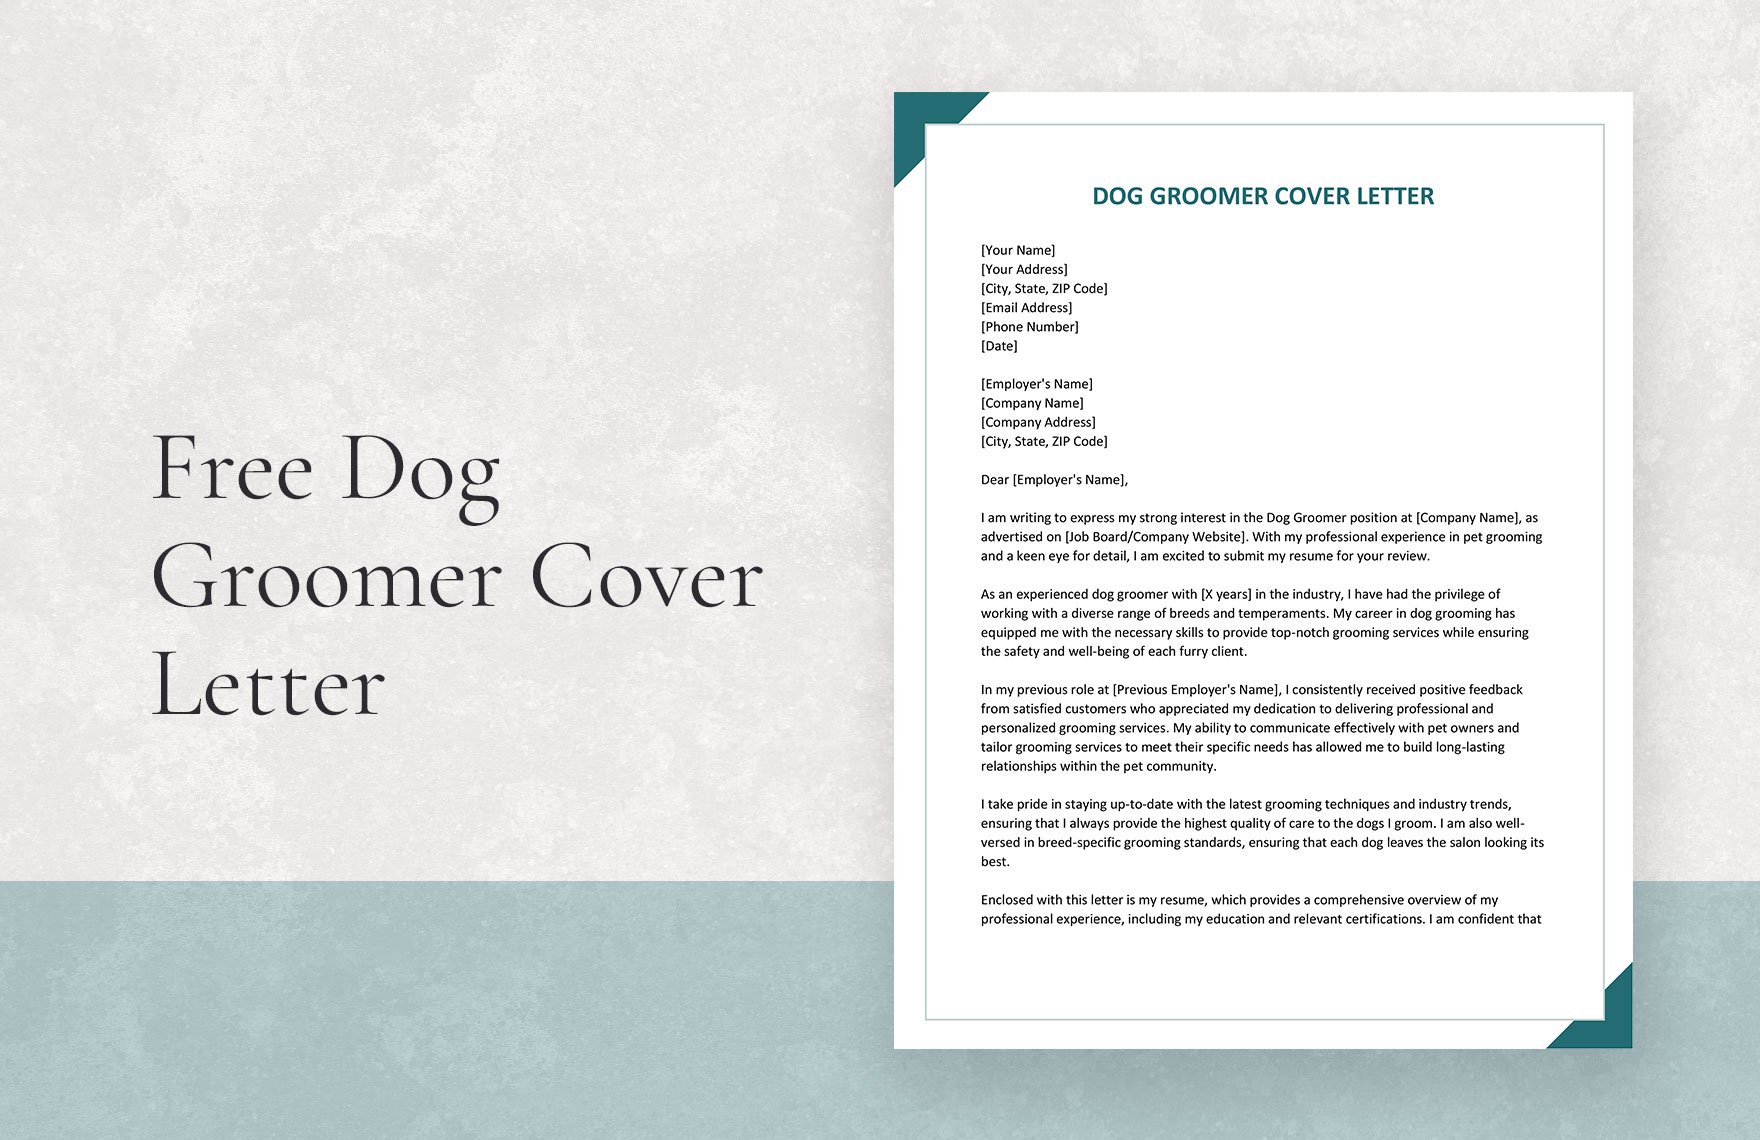 Dog Groomer Cover Letter in Word, Google Docs, Apple Pages